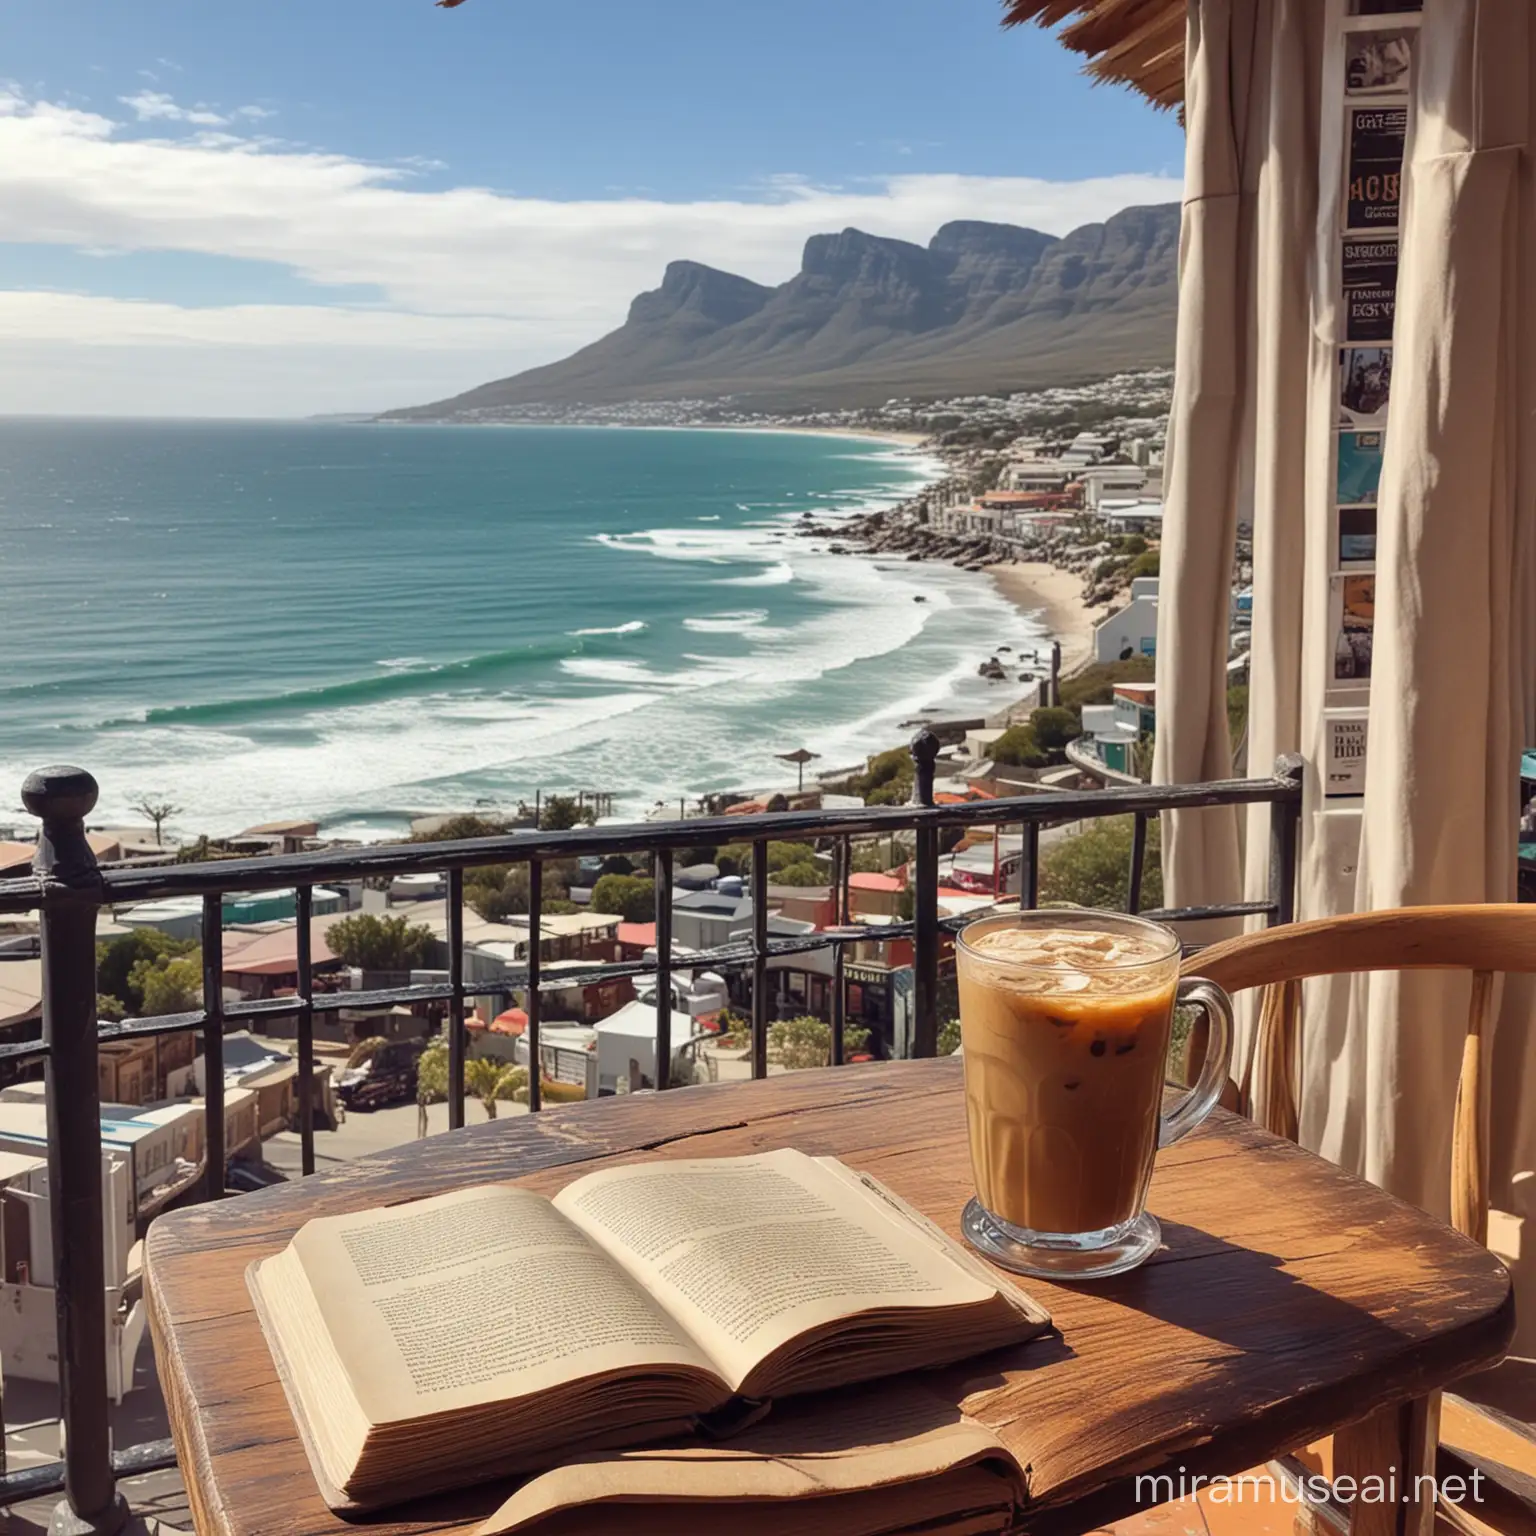 ice coffee with a fantasy book on a table in a cute restaurant in Cape town overlooking the breach
